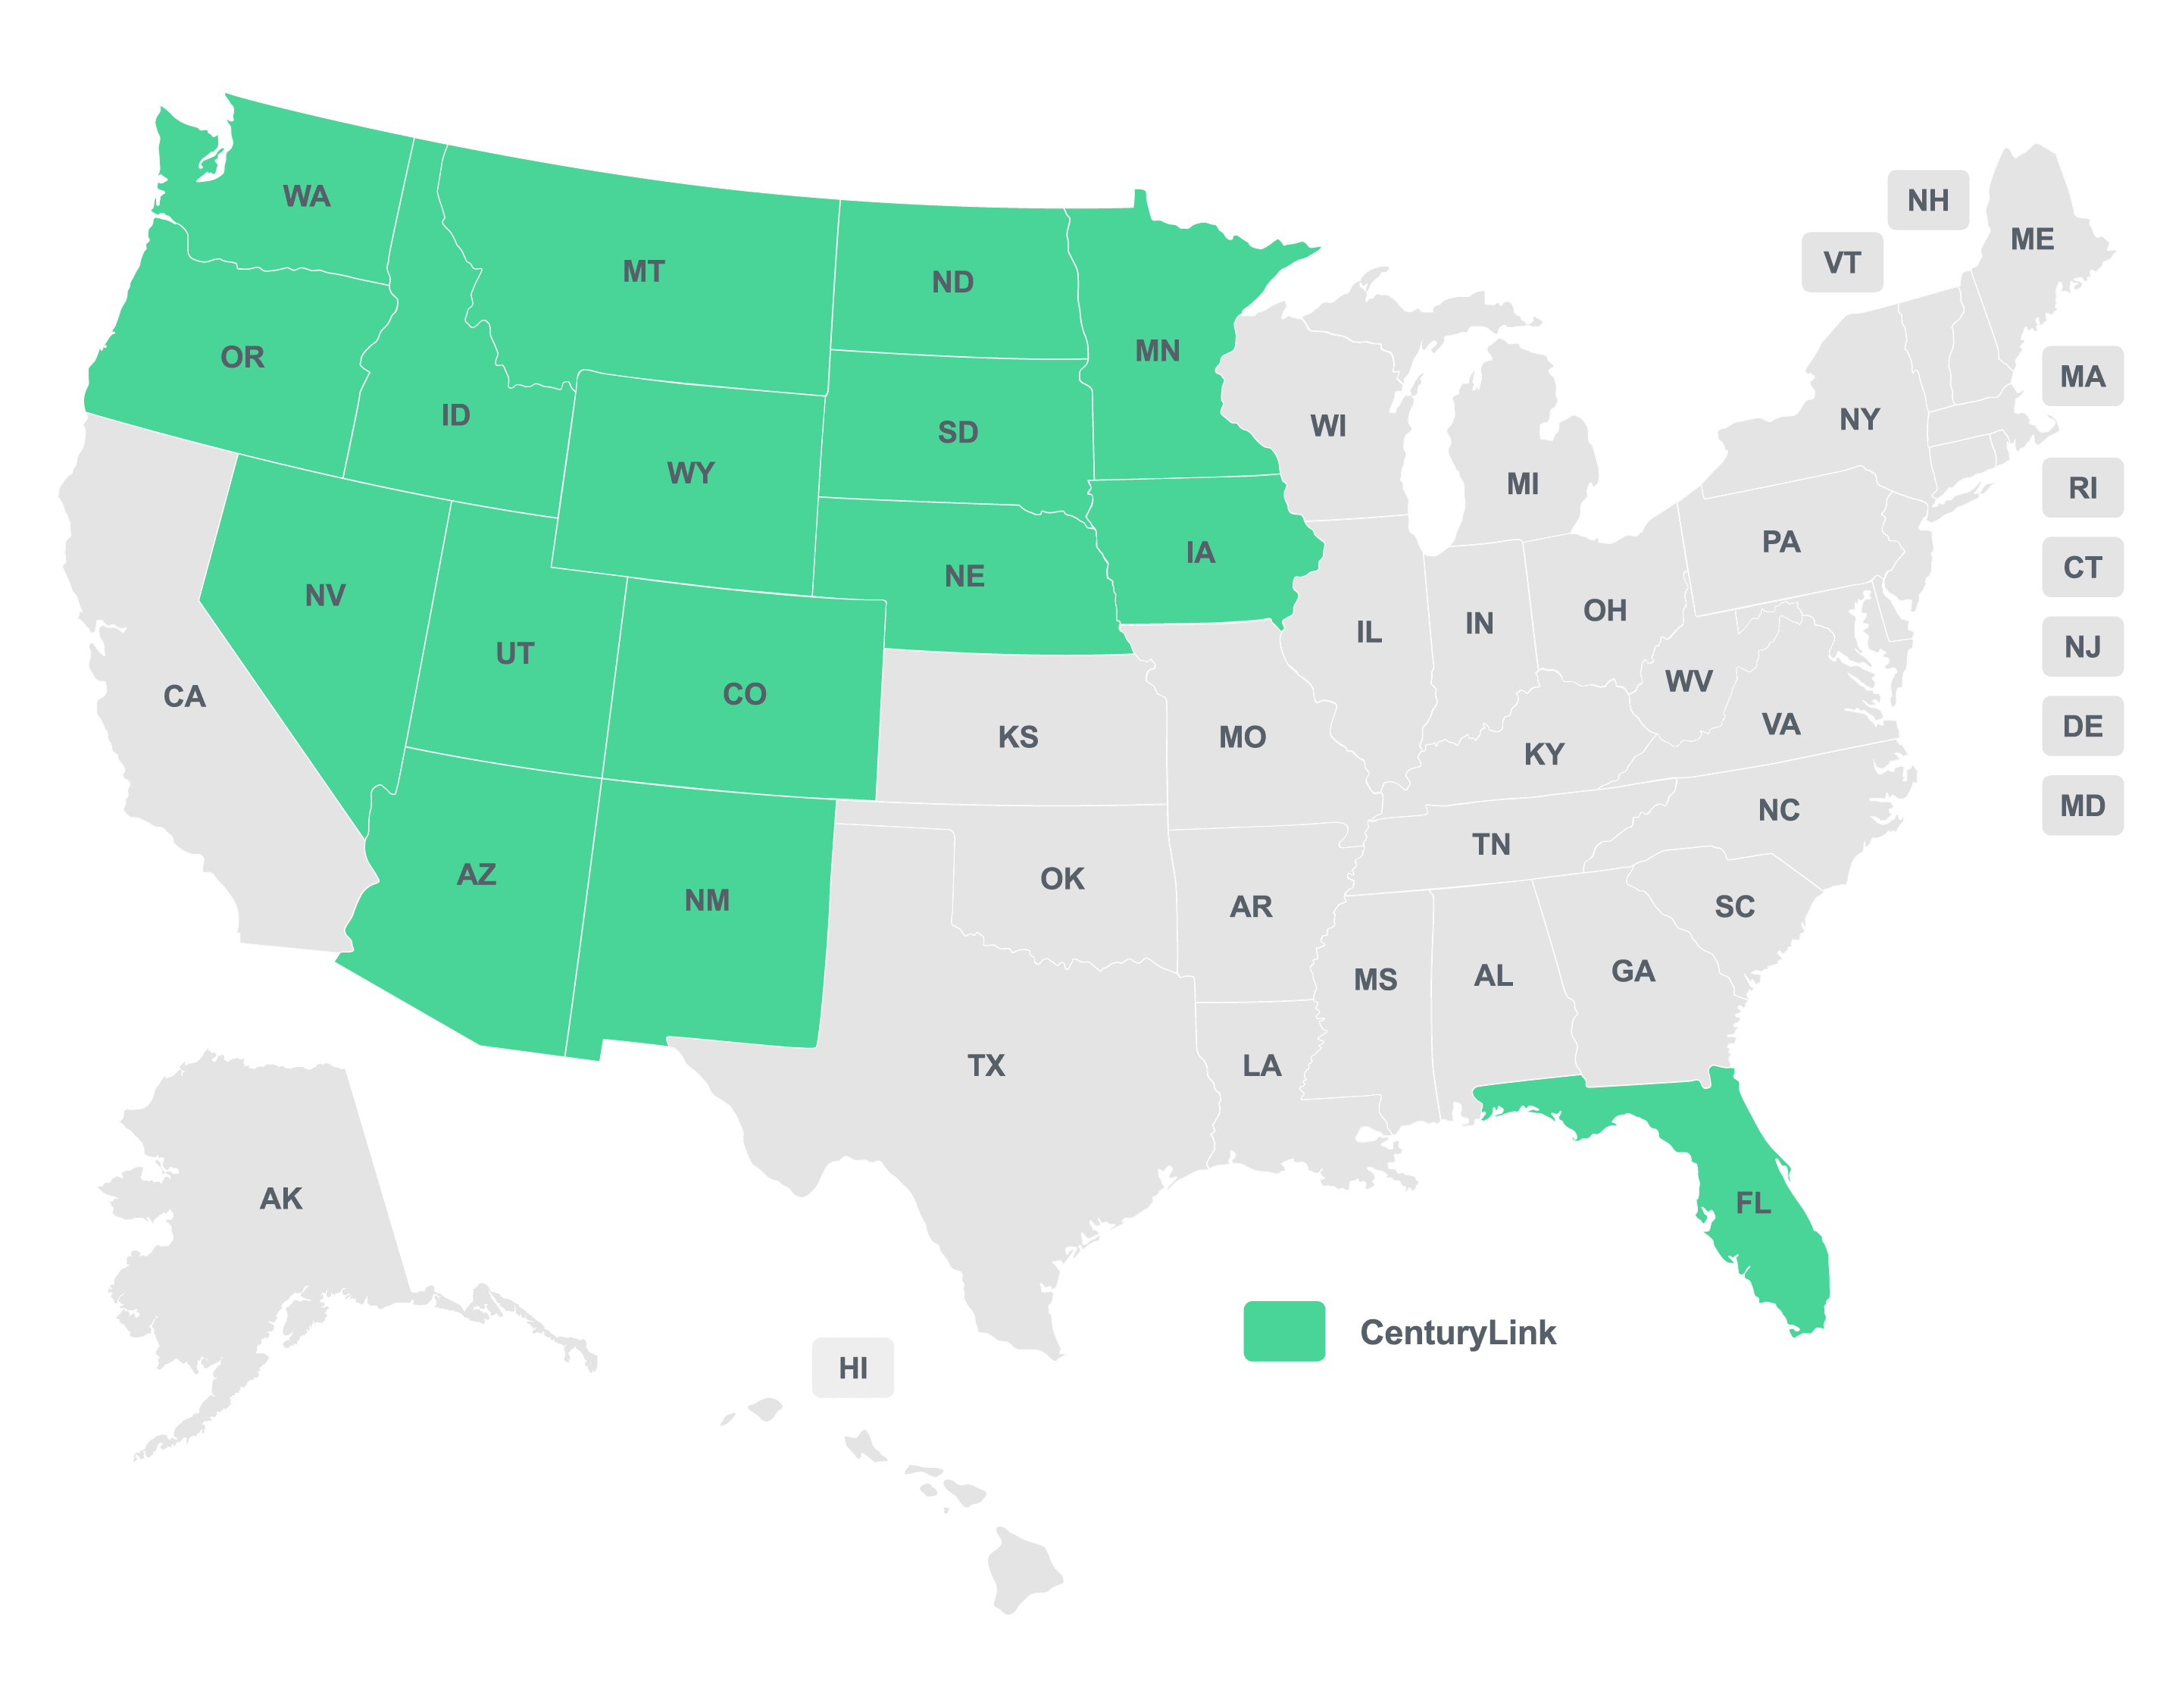 Illustrated map of the United States showing states where Centurylink and brightspeed are available